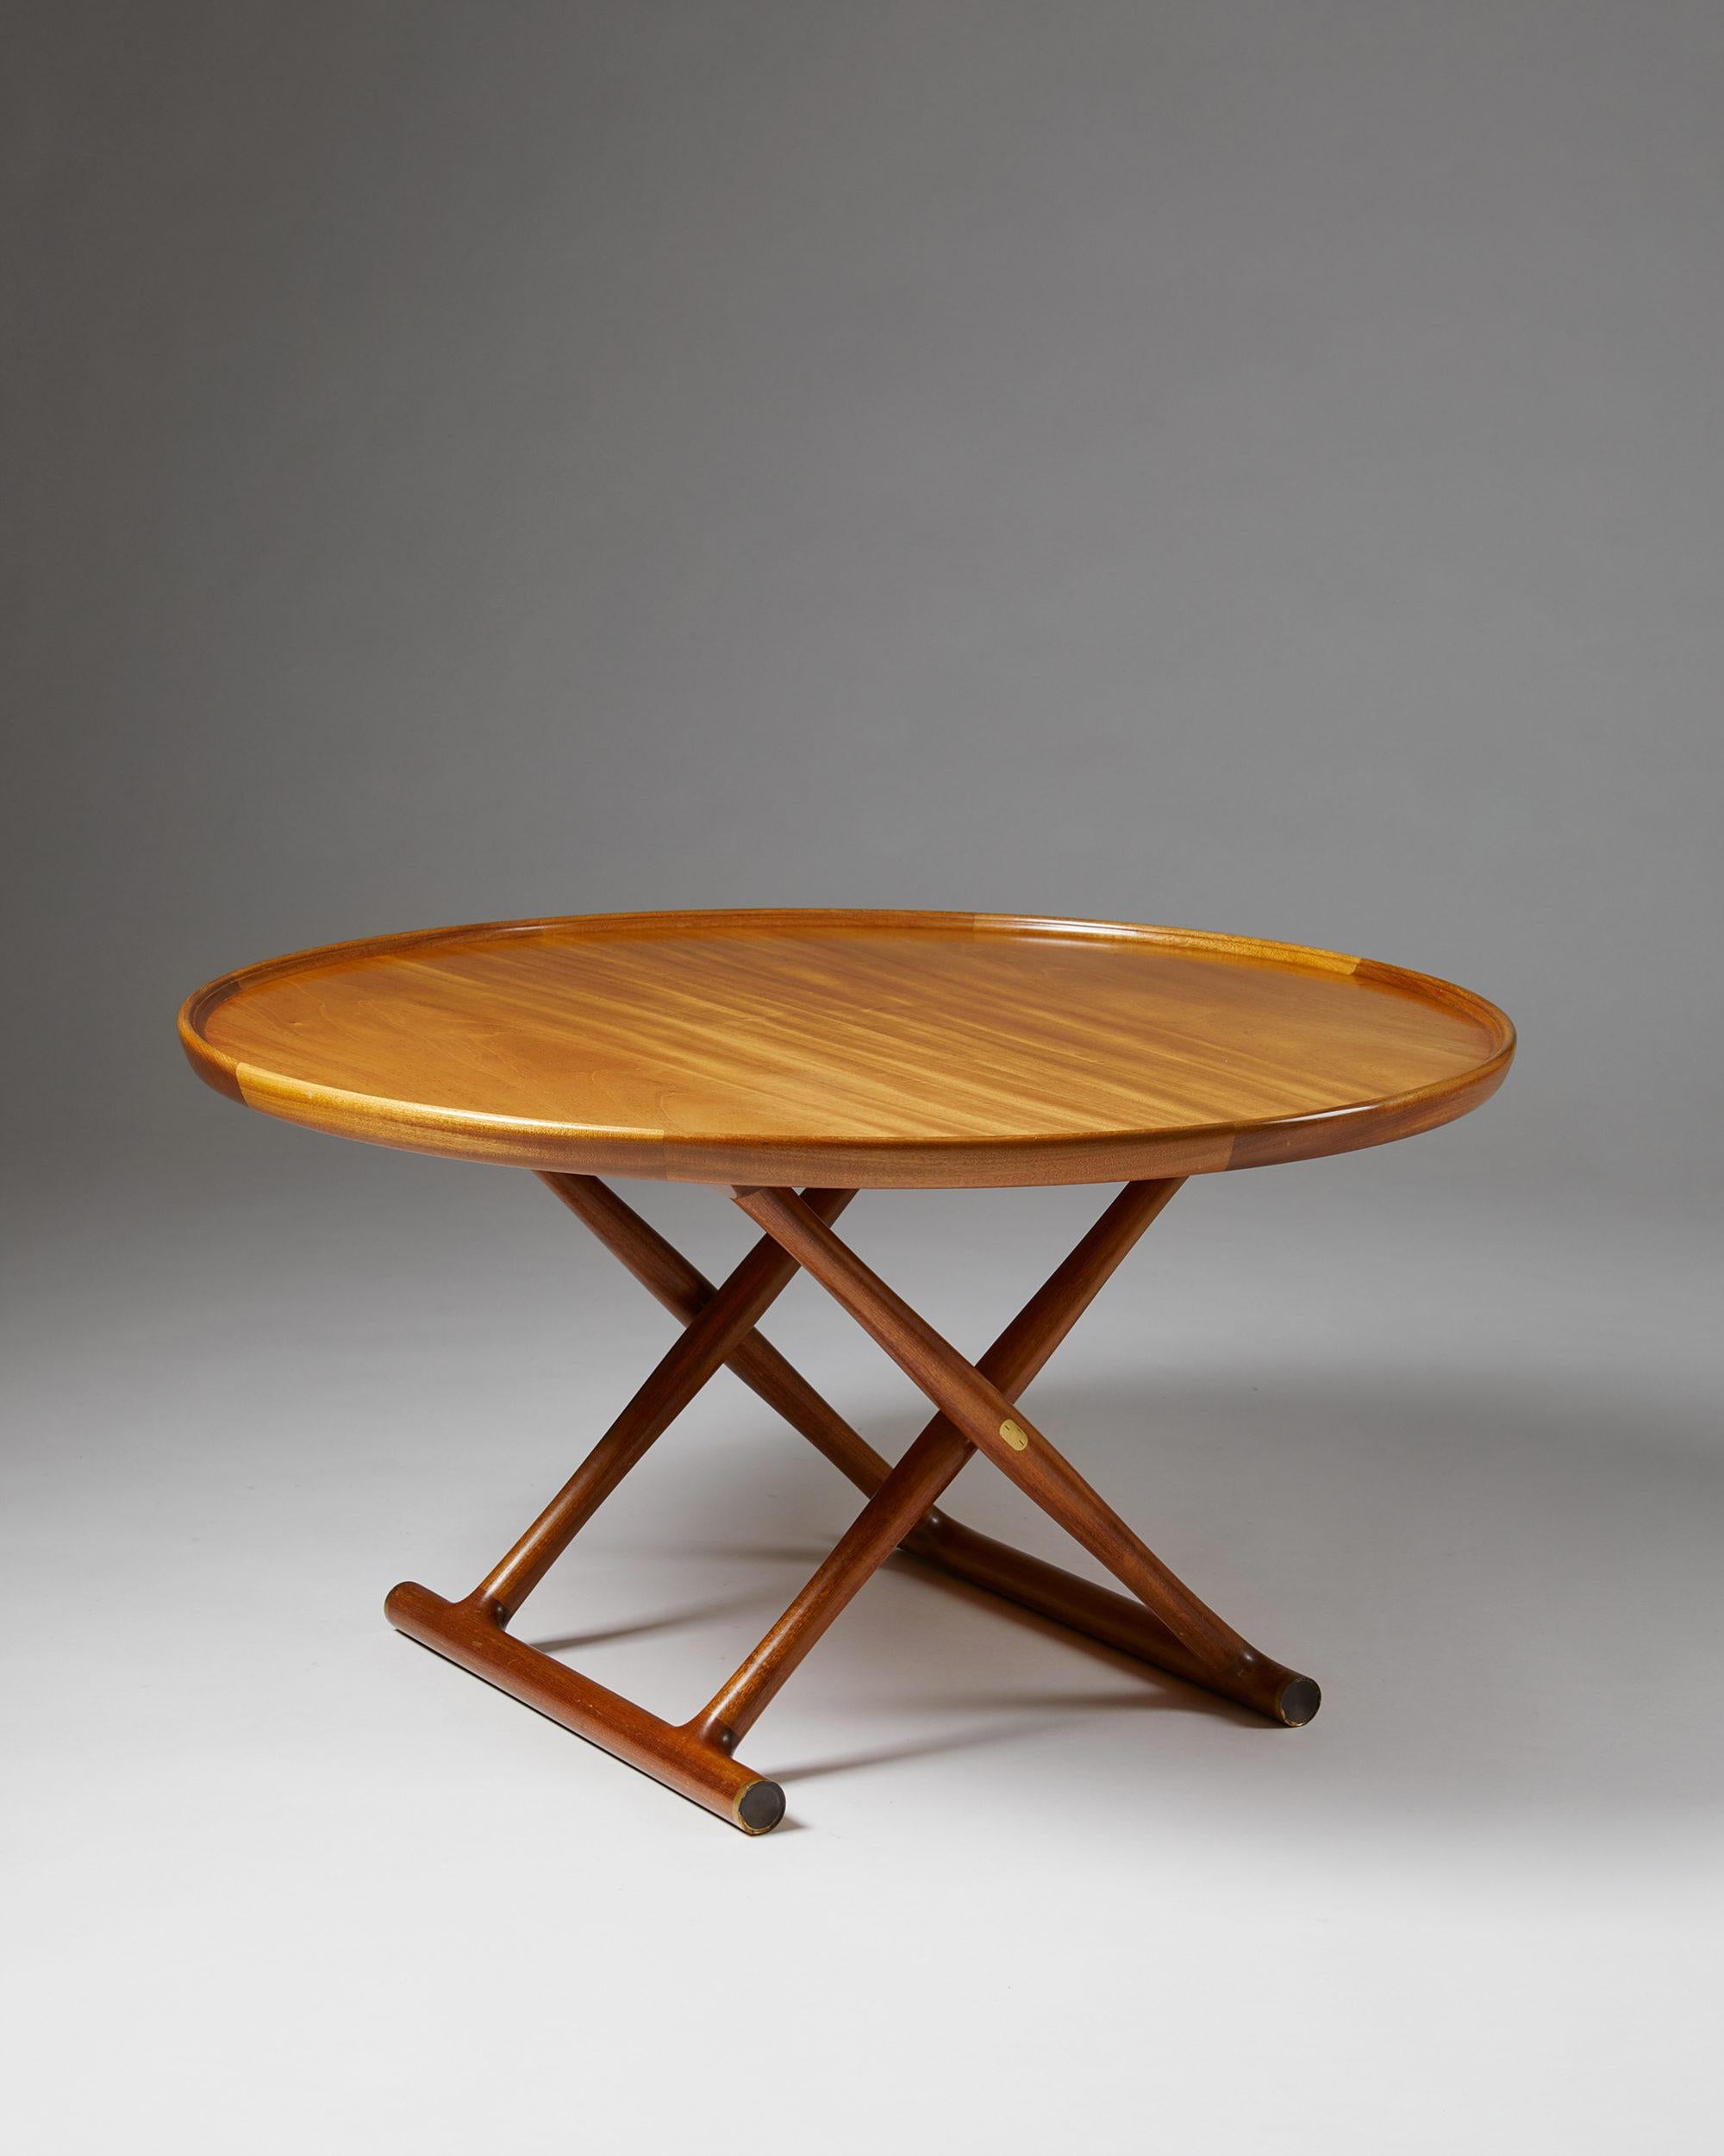 Occasional table “Egyptian Table” designed by Mogens Lassen, Denmark, 1940s. Mahogany and brass.